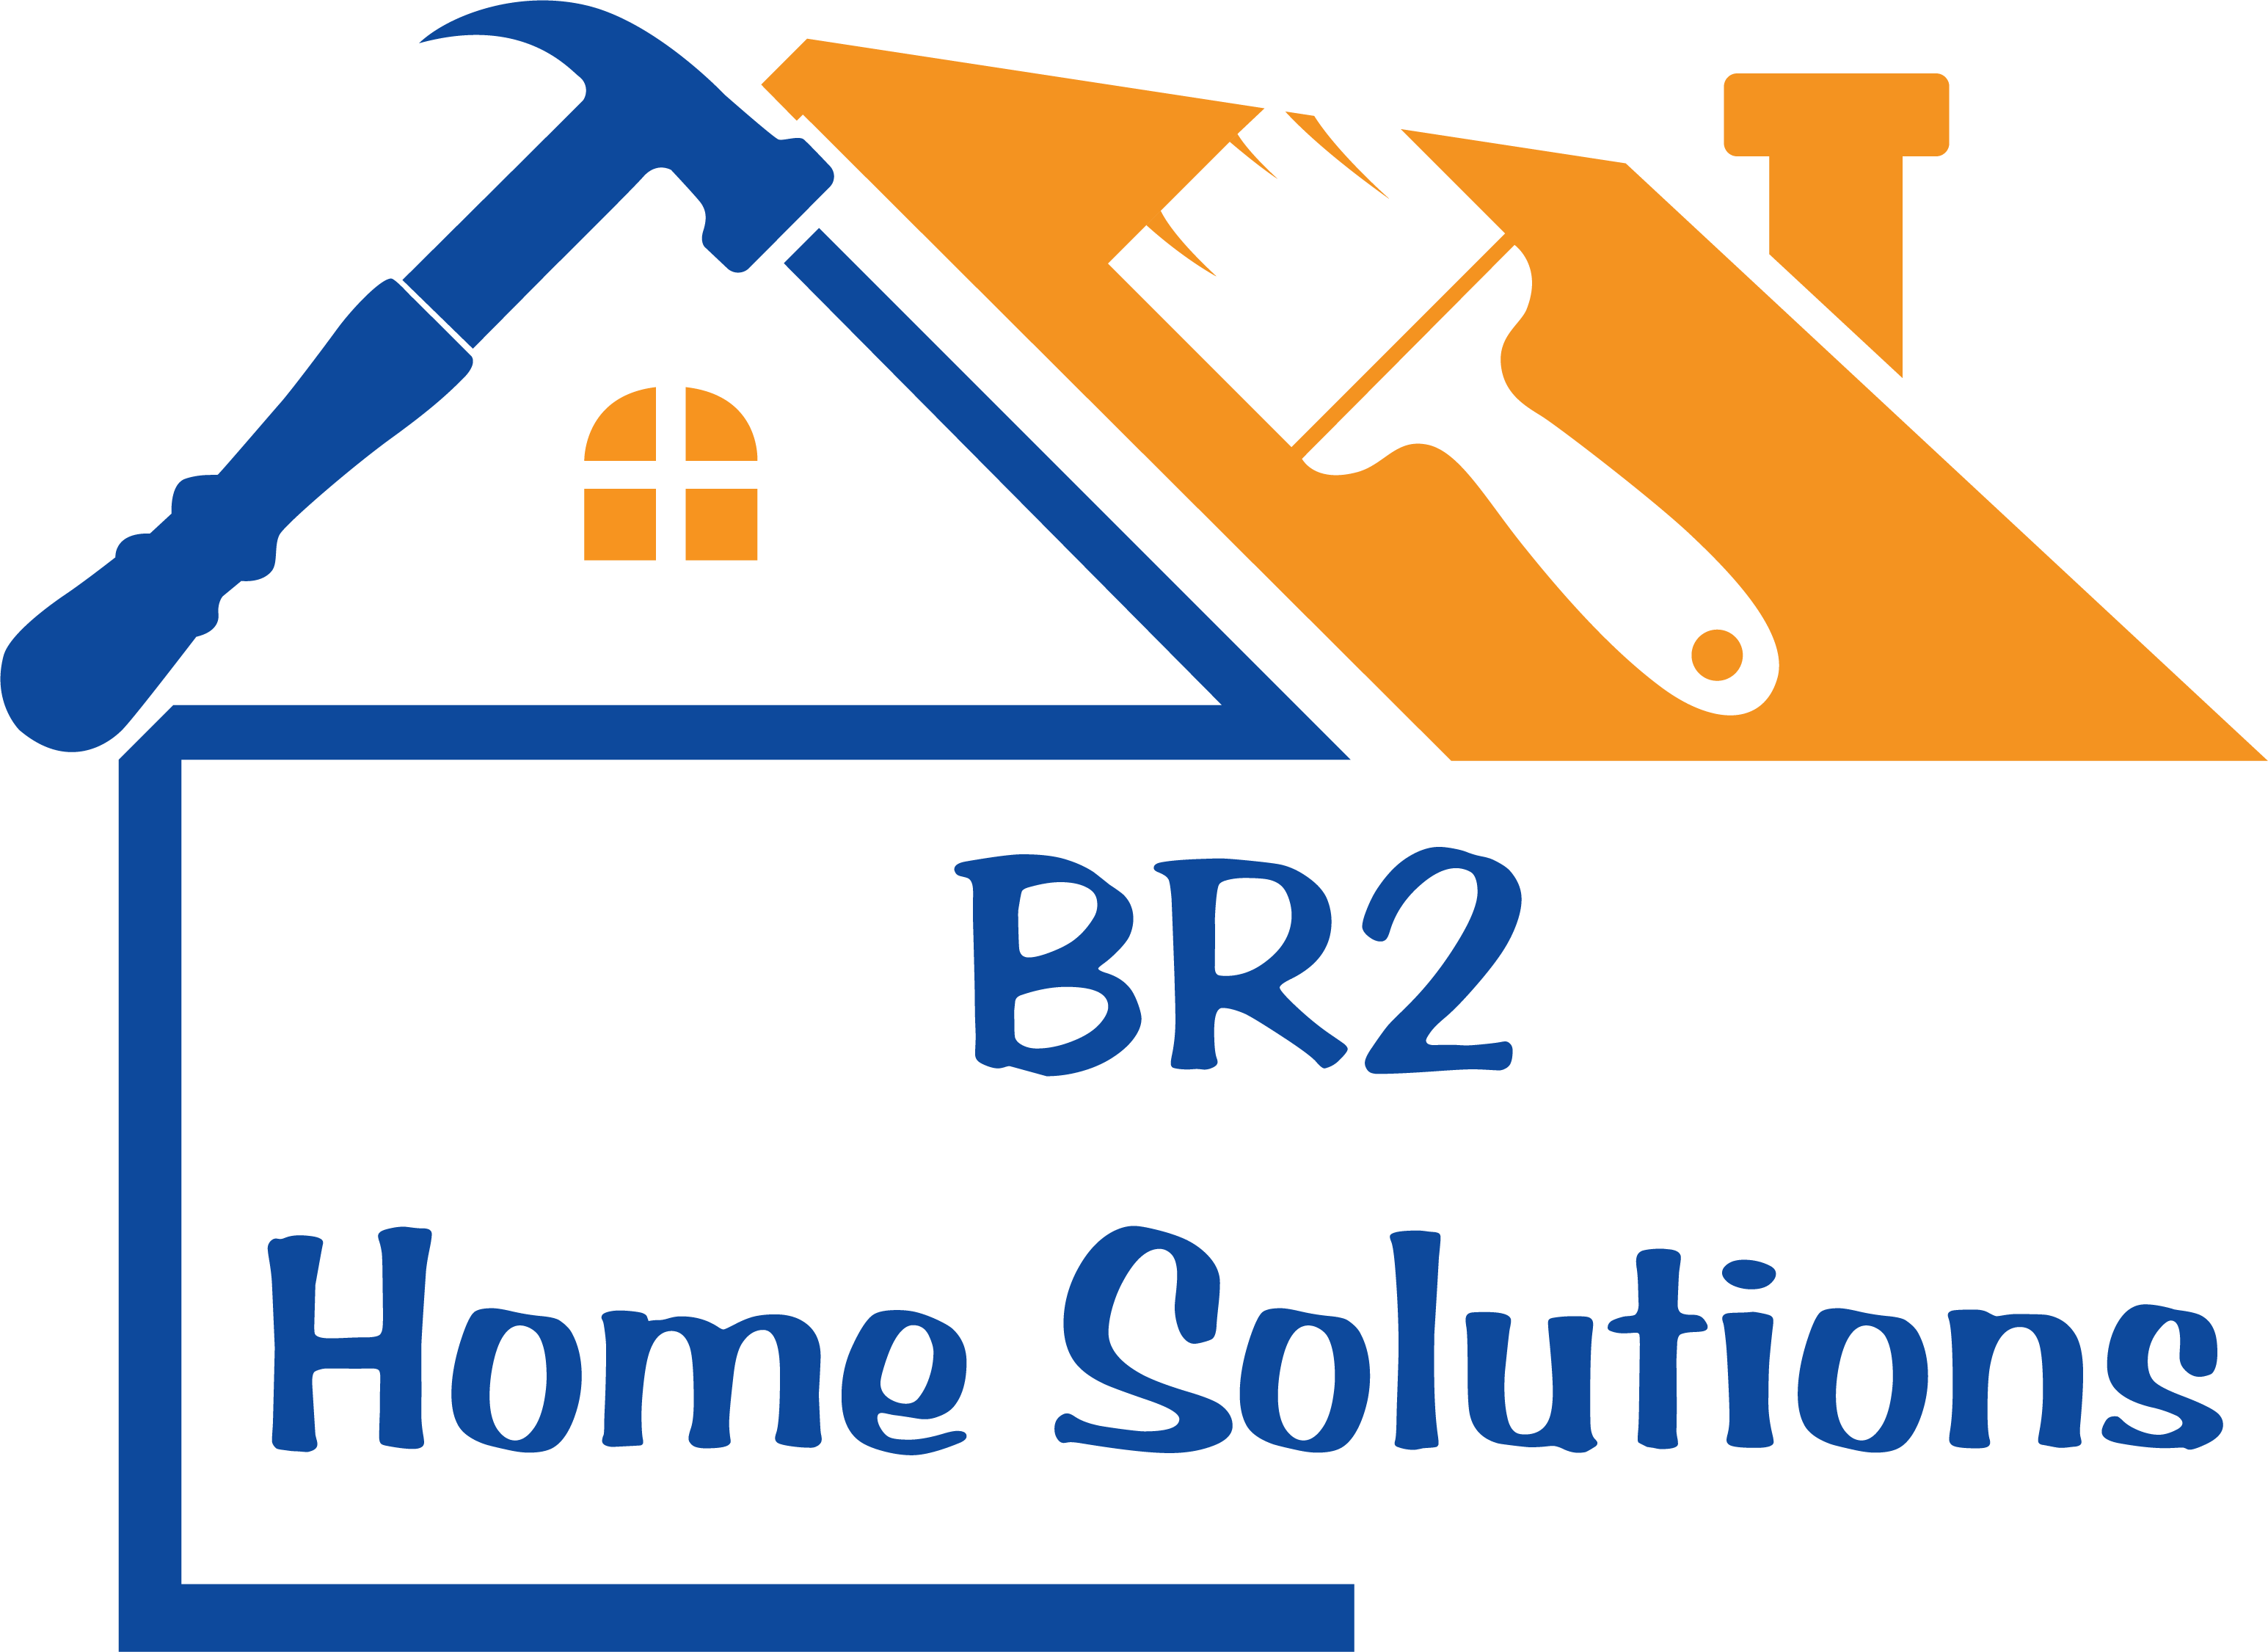 BR2 Home Solutions